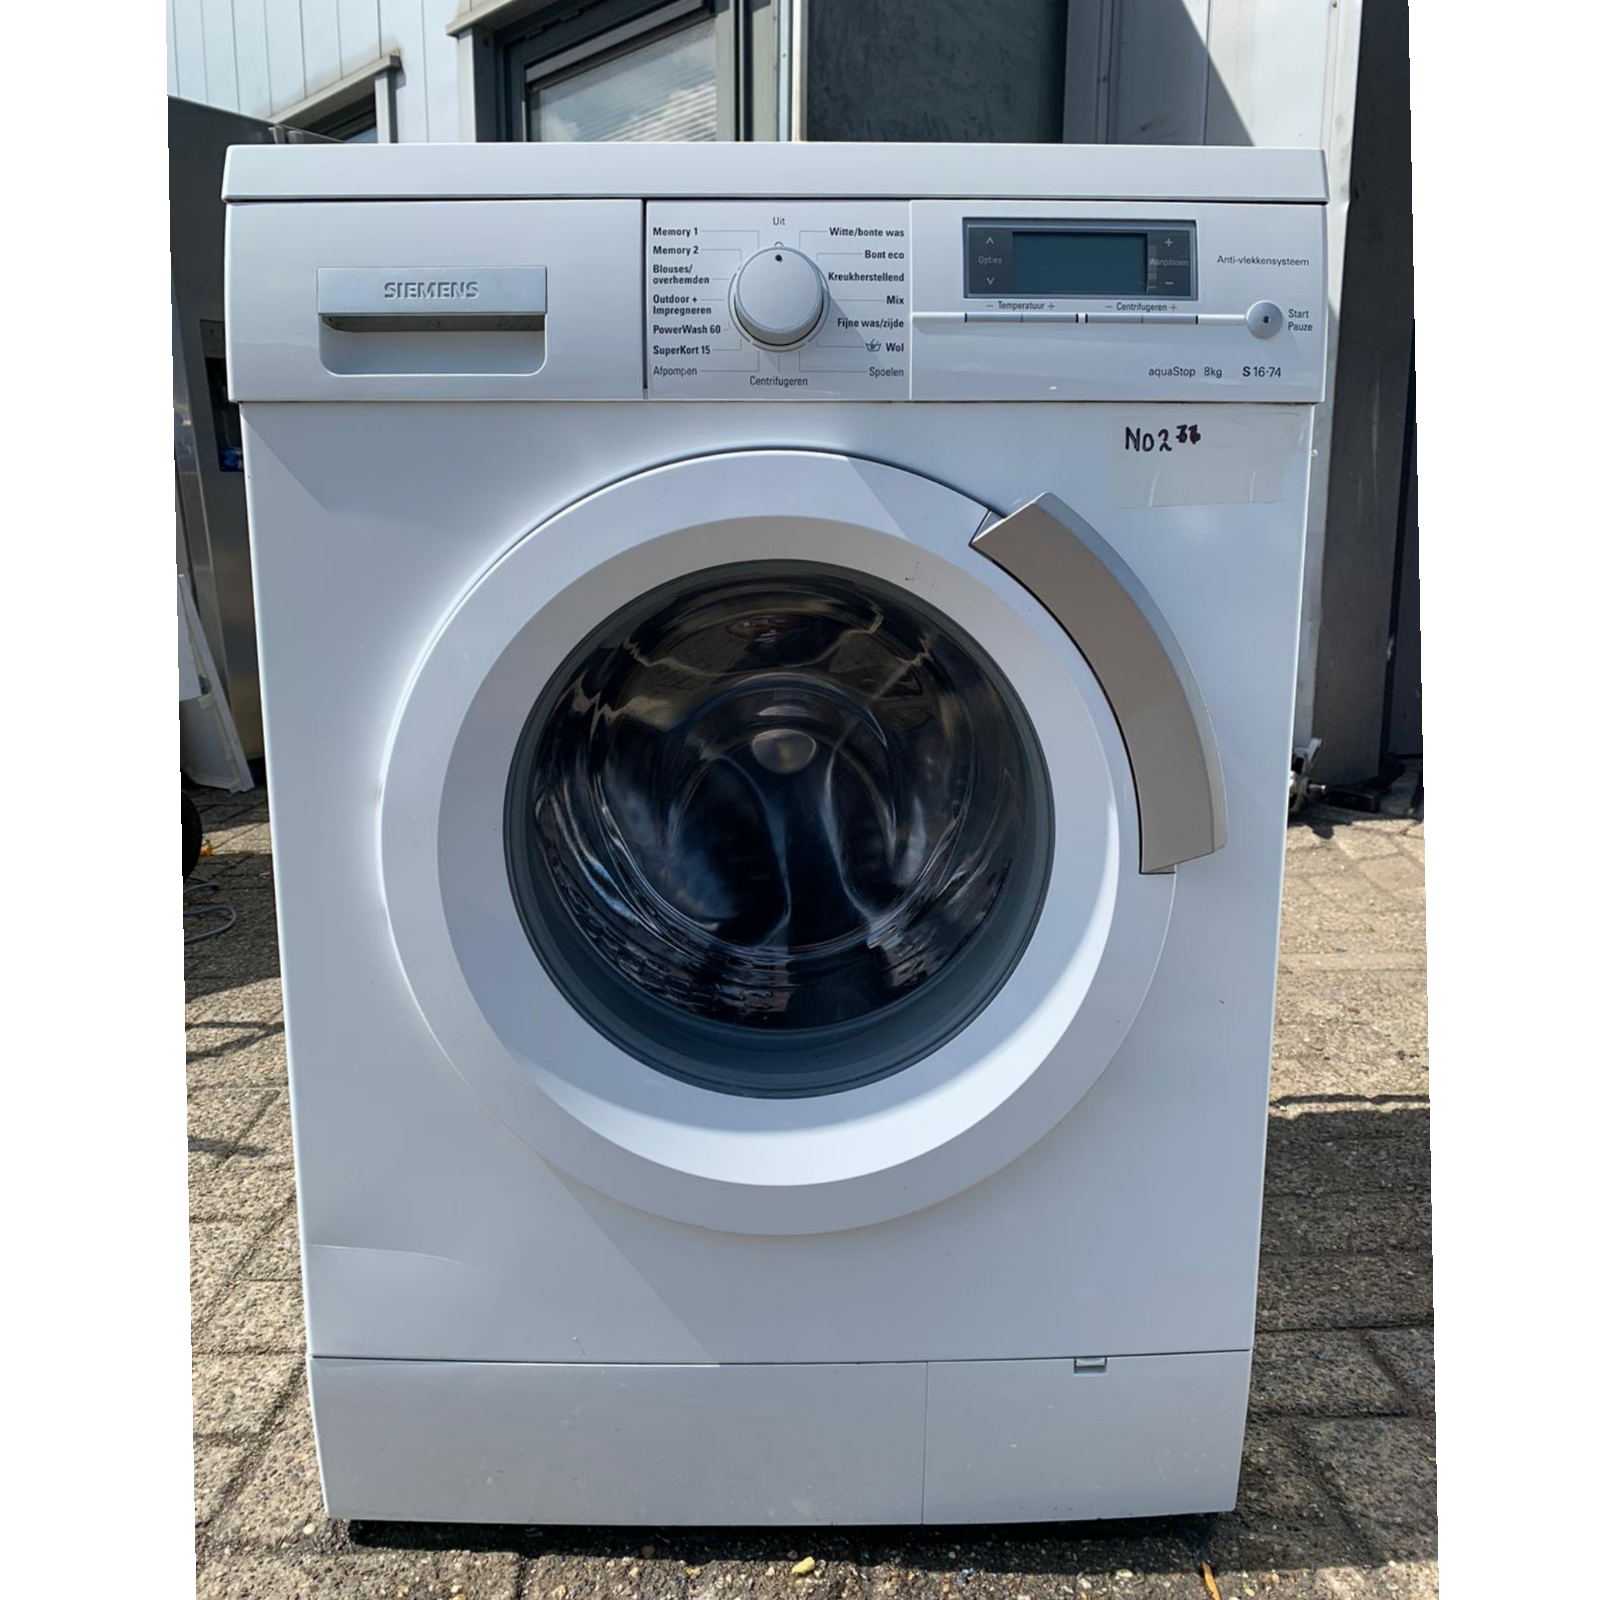 SIEMENS S16-74 - - - 1600 TOEREN – R.A.C. Witgoed Service